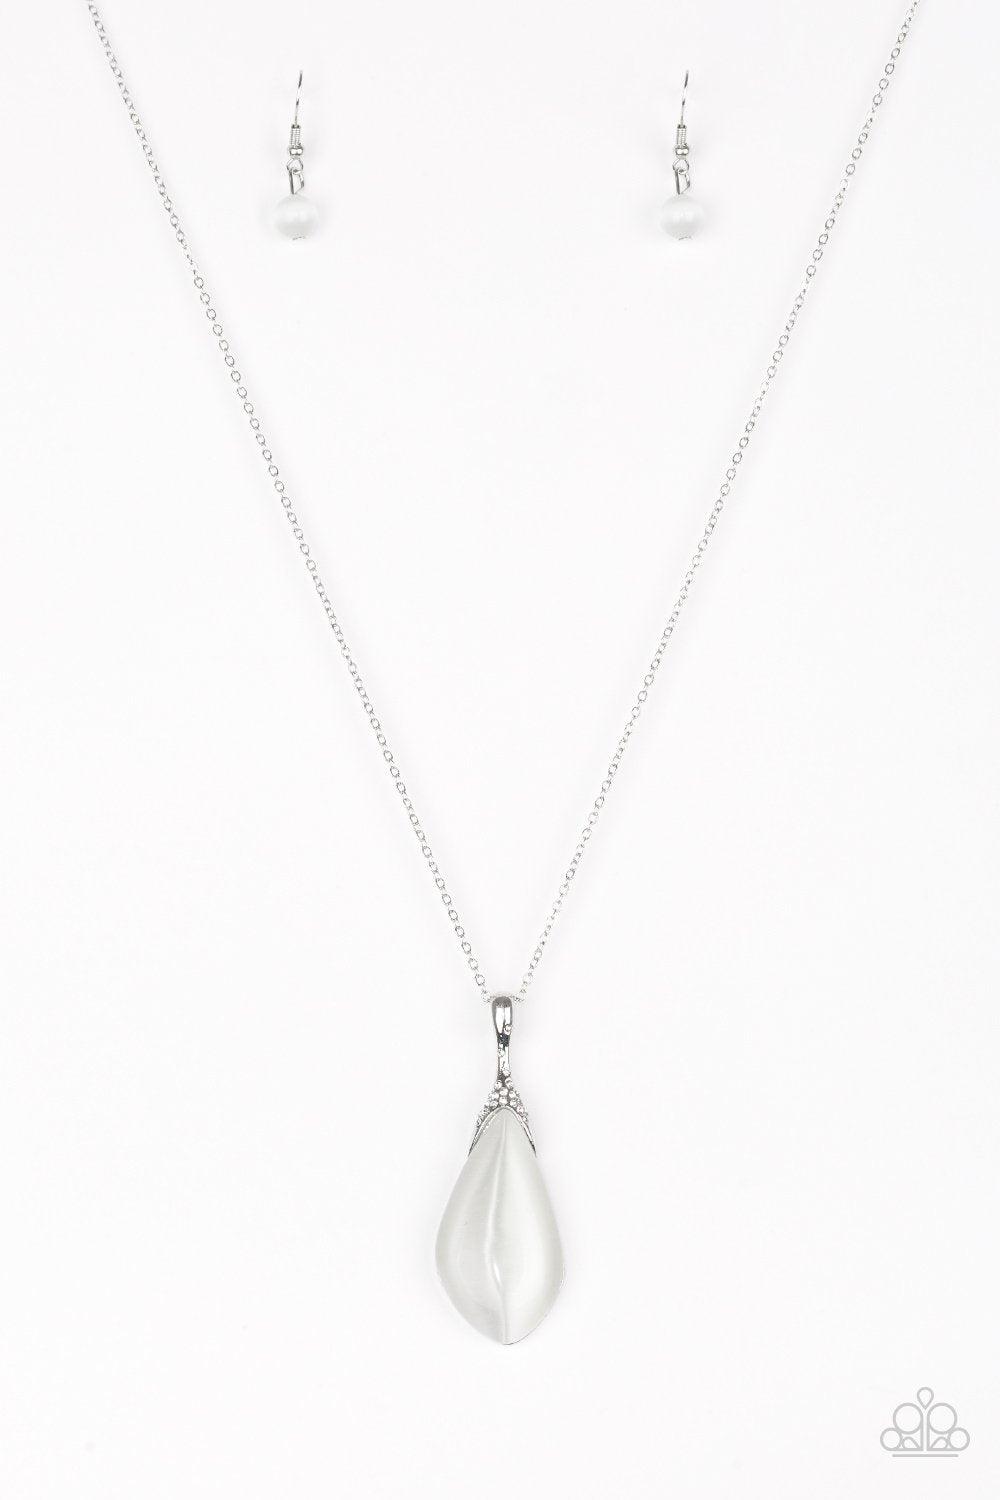 Friends In GLOW Places White Moonstone Necklace - Paparazzi Accessories-CarasShop.com - $5 Jewelry by Cara Jewels